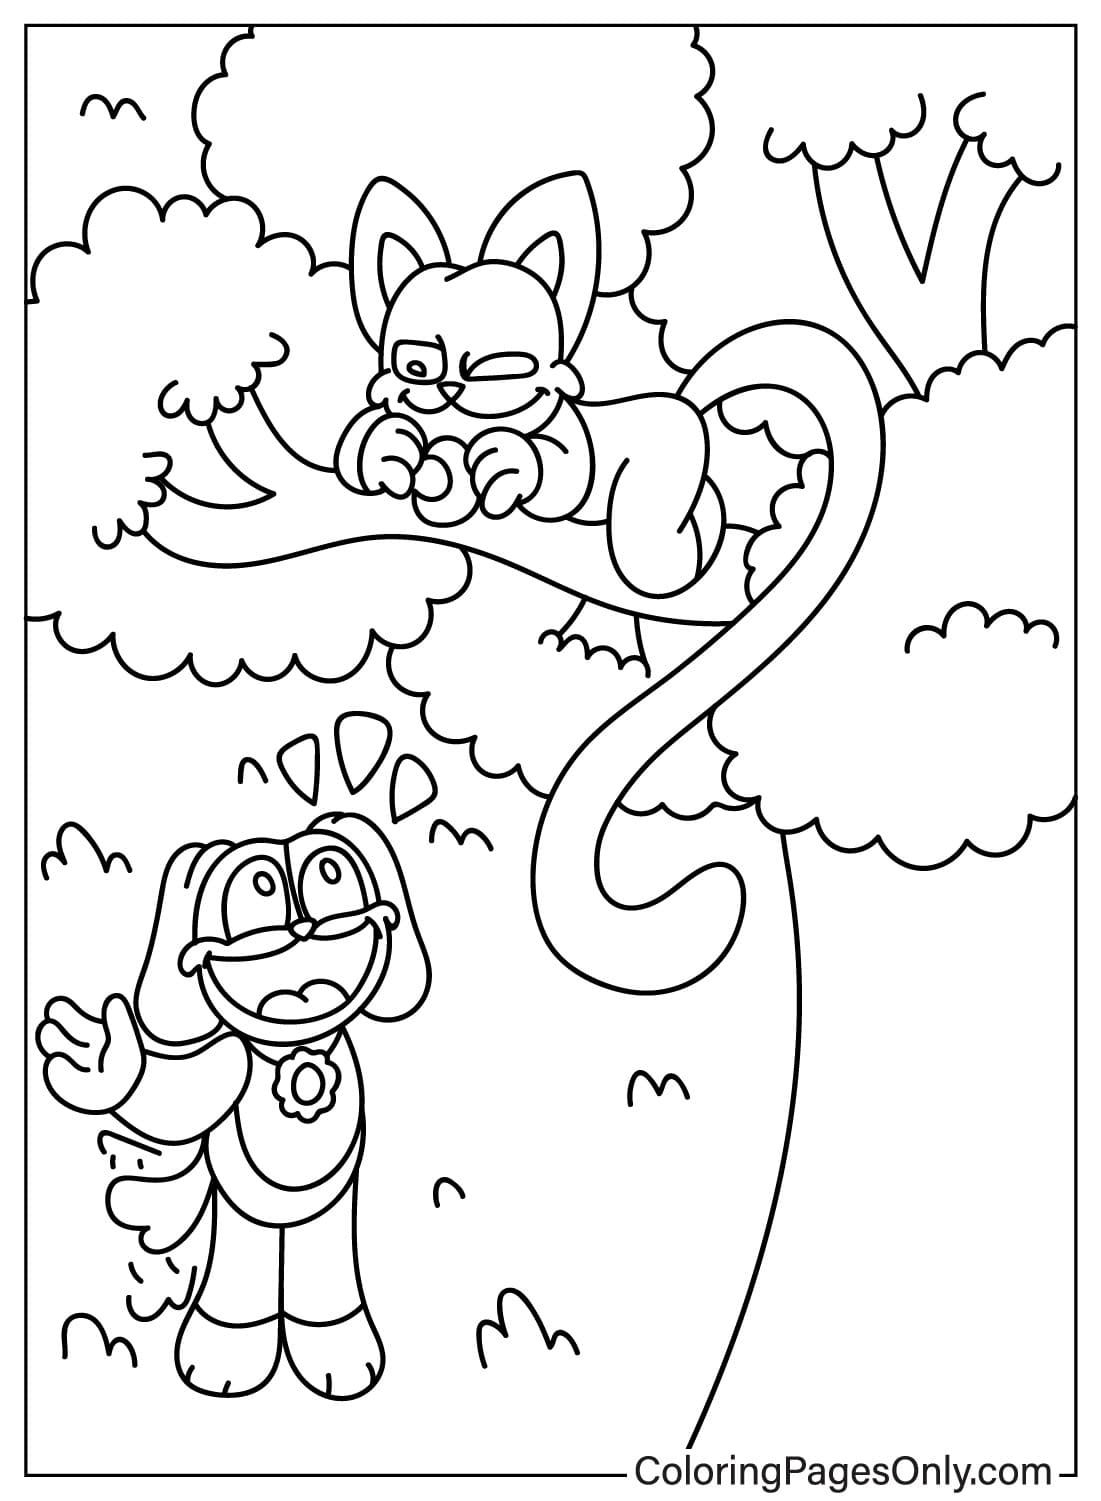 CatNap and DogDay Coloring Page - Free ...